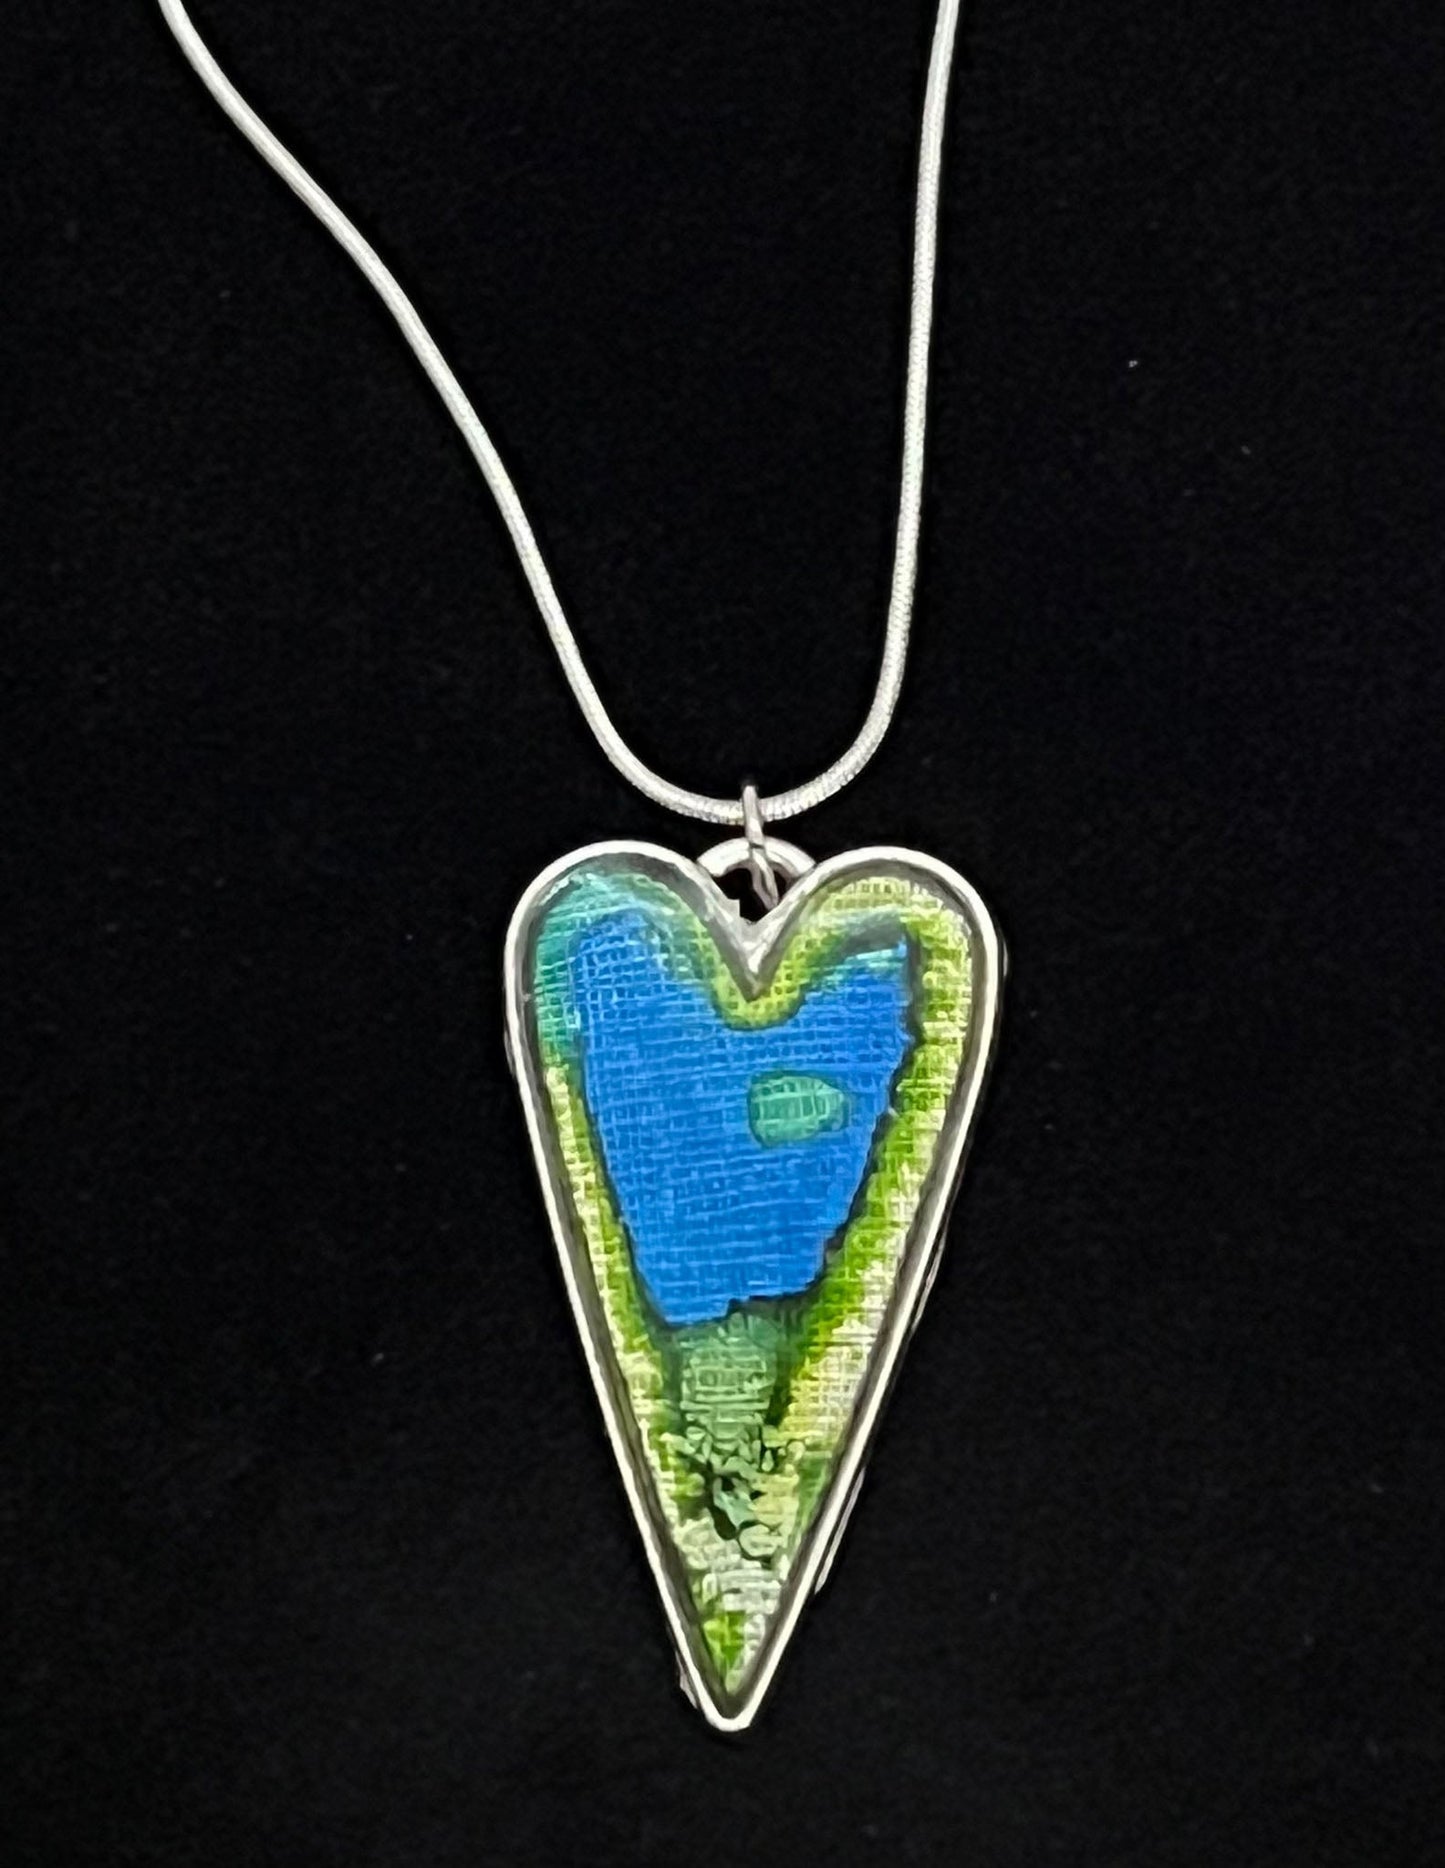 heart shaped silver pendant necklace with blue and green artwork